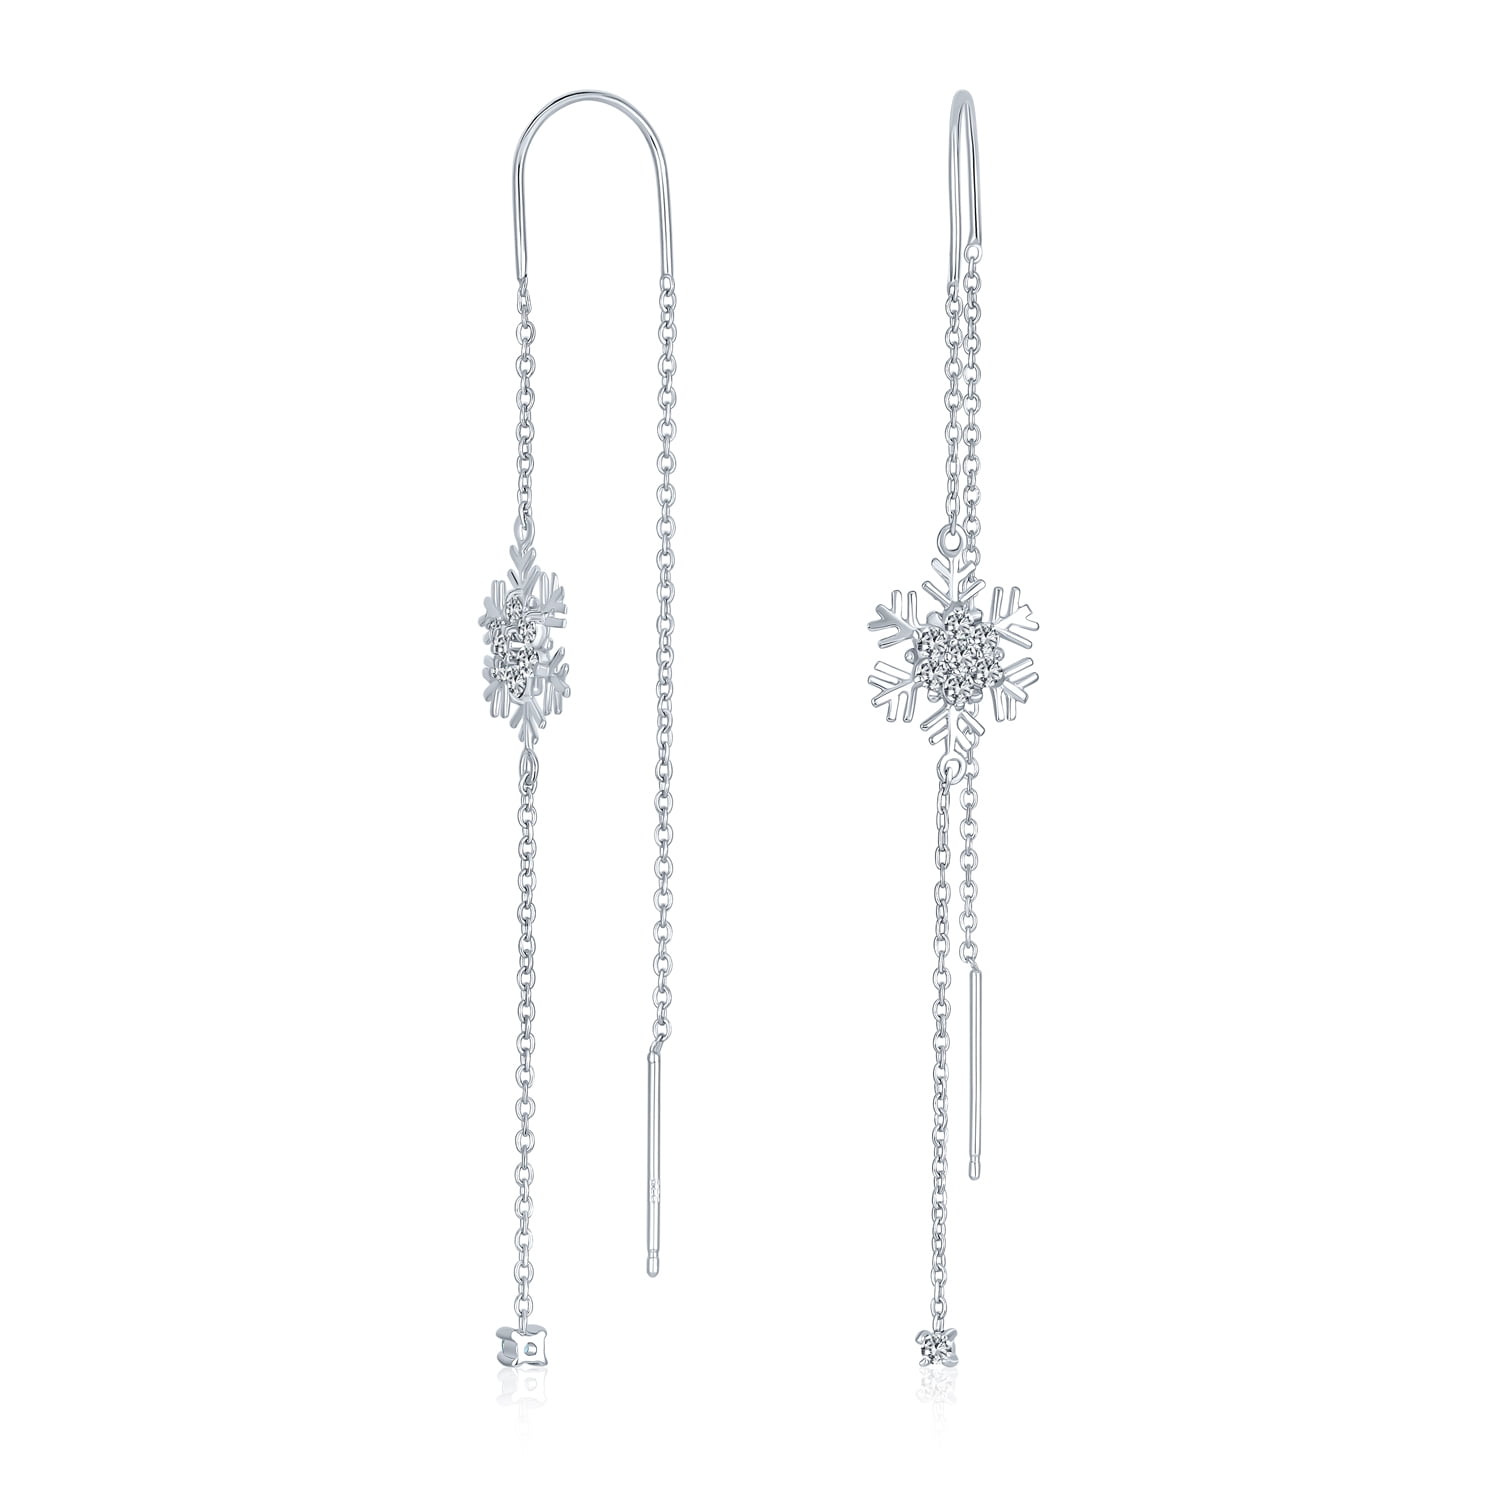 Details about   White Opal Hook Earrings With White Sapphire Accents  925 Sterling Silver